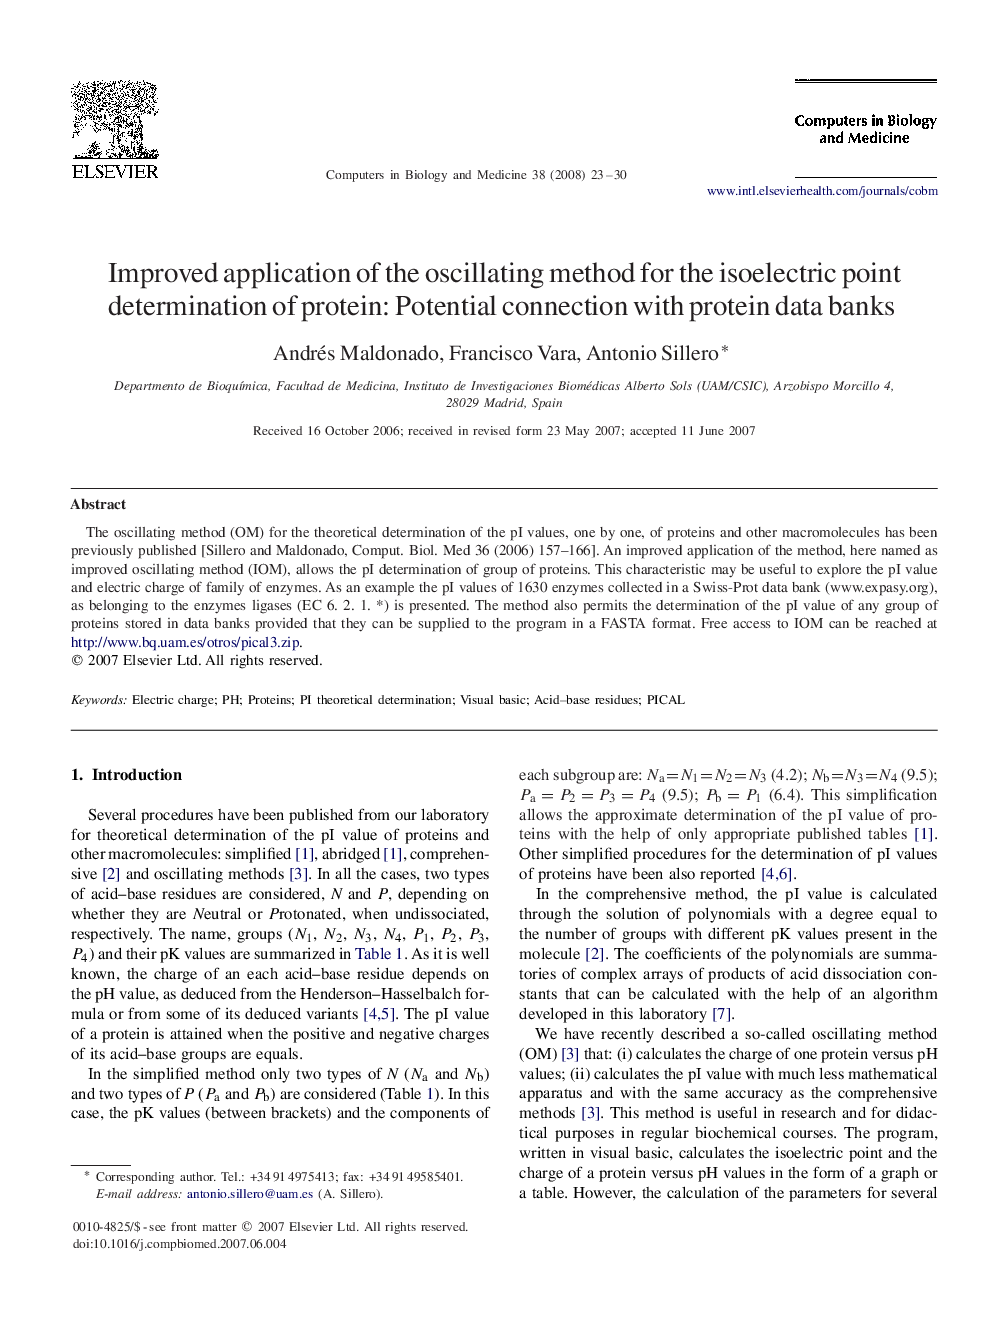 Improved application of the oscillating method for the isoelectric point determination of protein: Potential connection with protein data banks